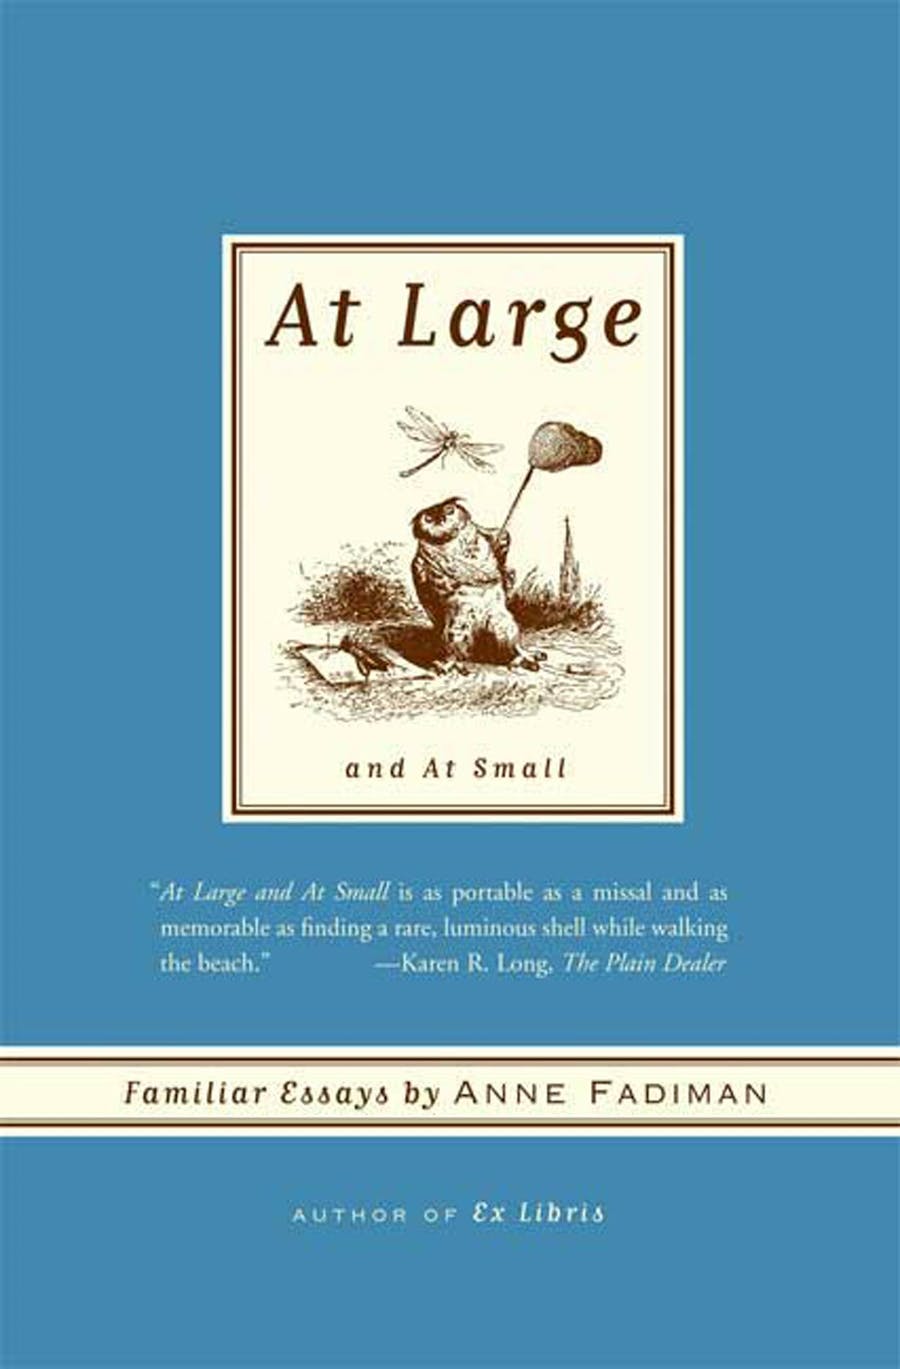 At Large and At Small: Familiar Essays by Anne Fadiman